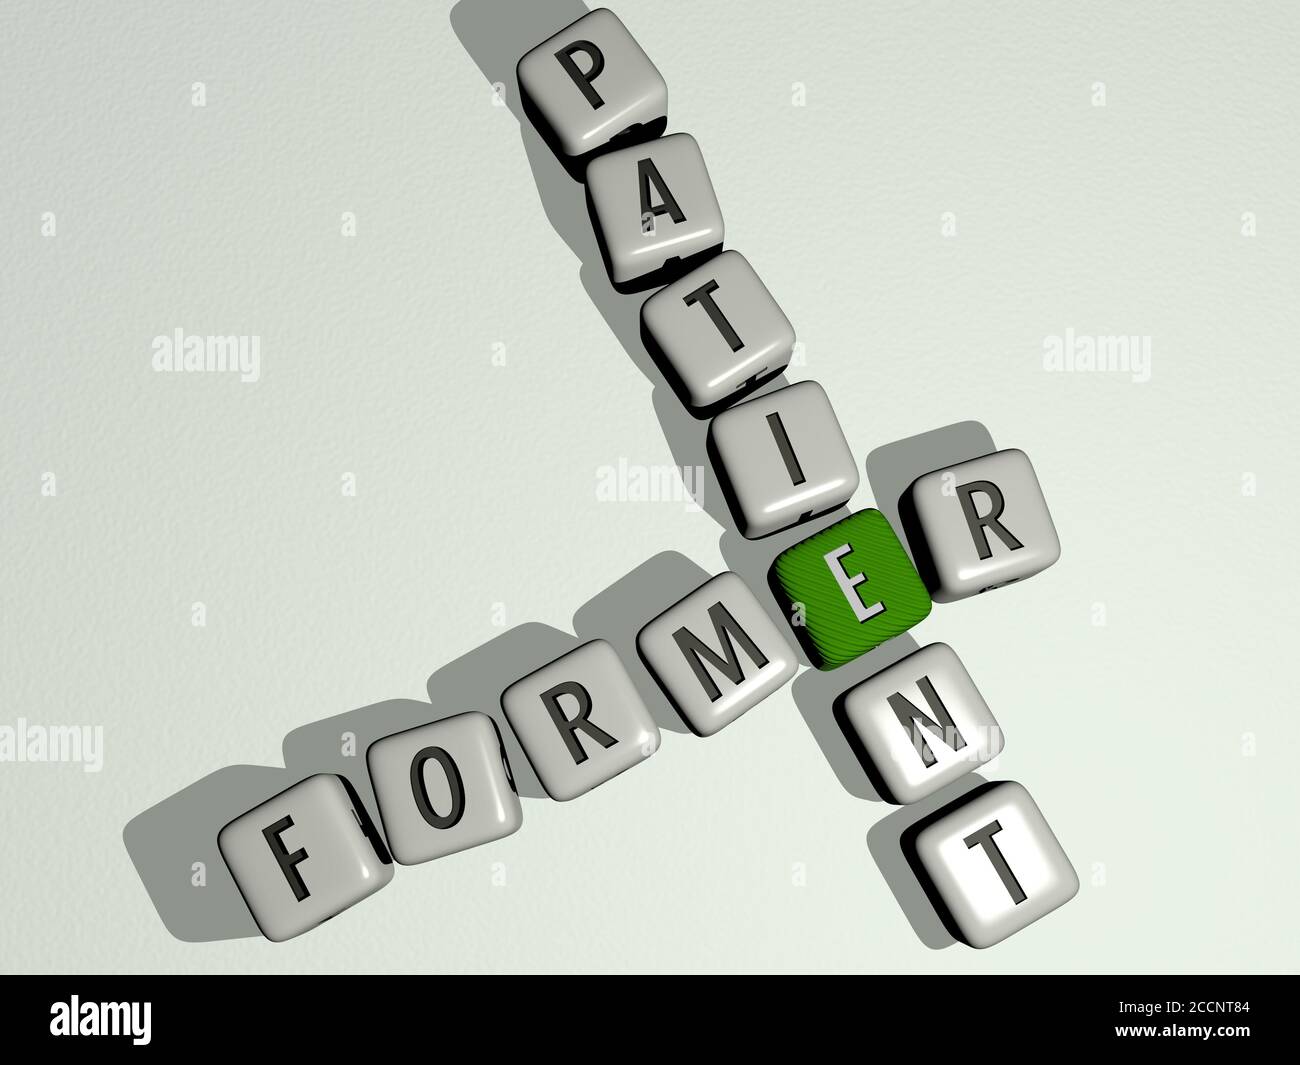 FORMER PATIENT crossword by cubic dice letters, 3D illustration Stock Photo